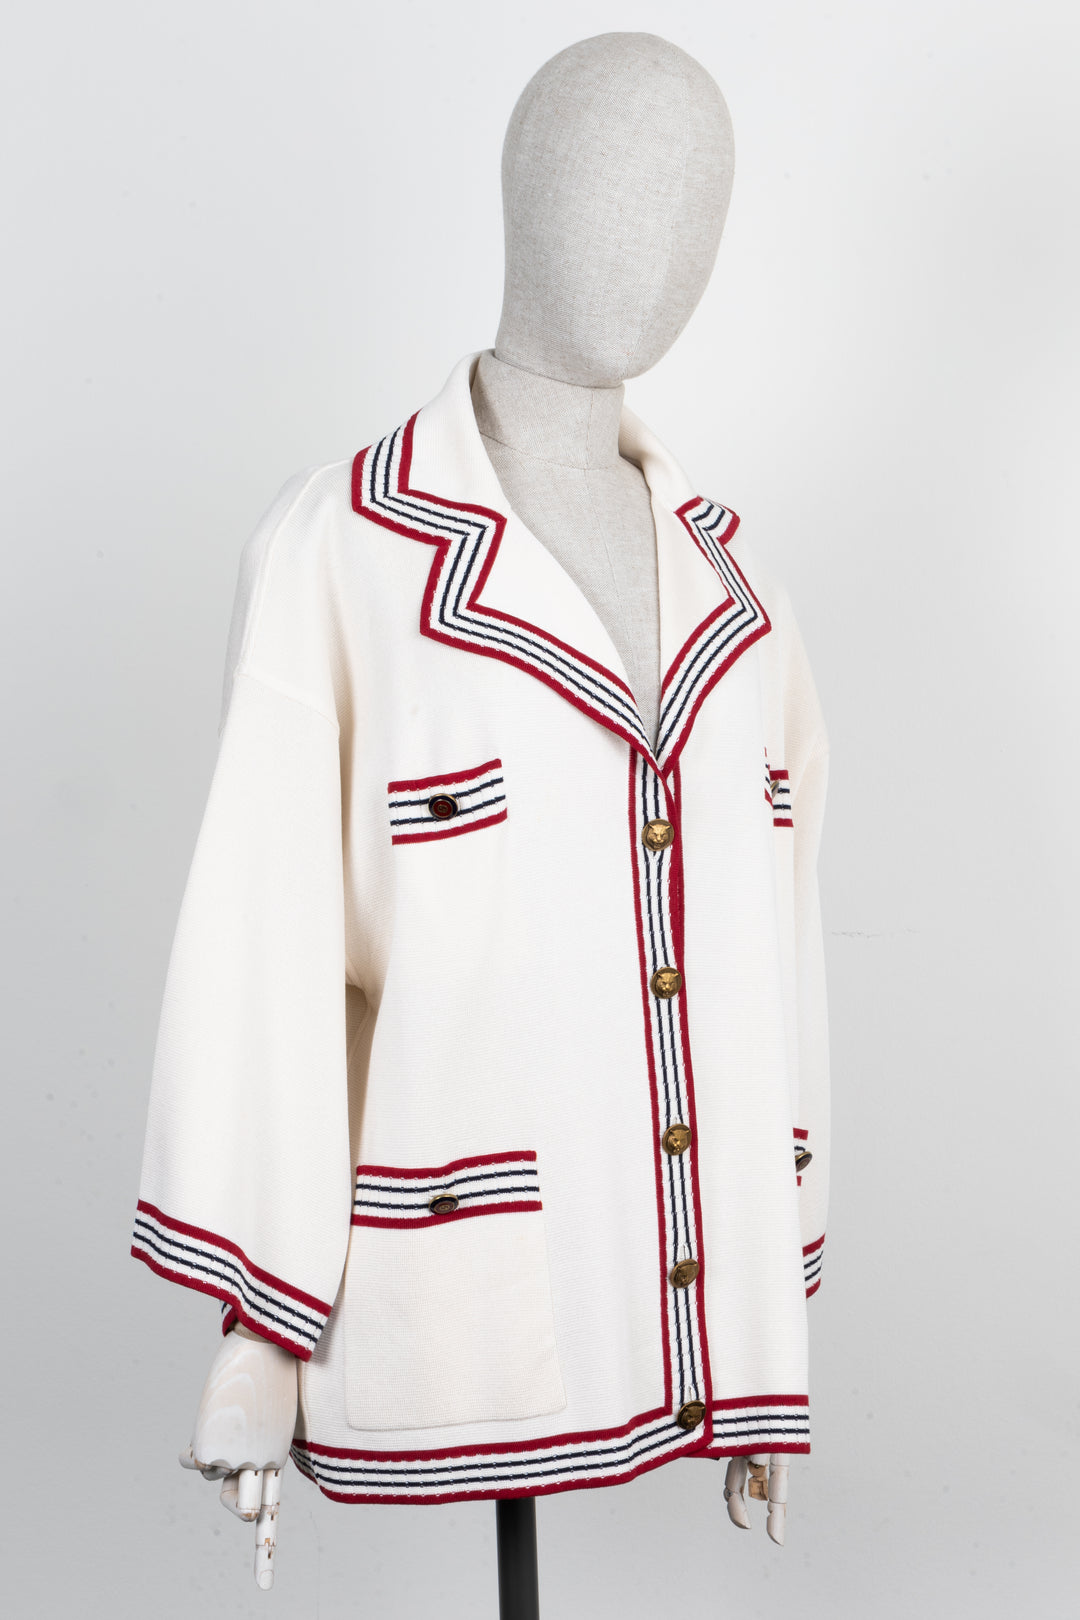 GUCCI Knit Jacket Ivory Red